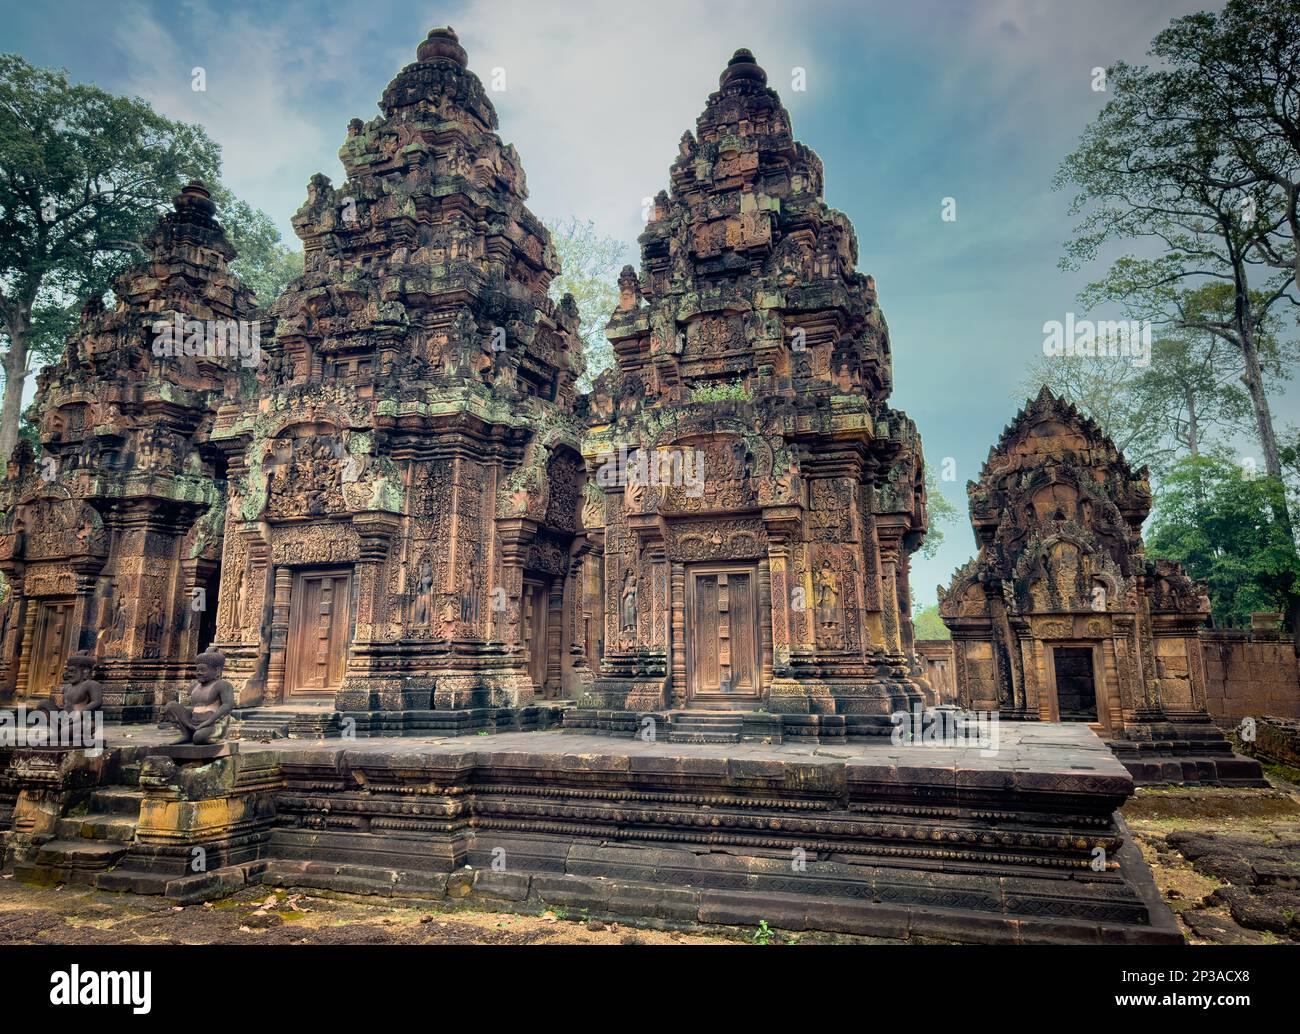 The inner compund of the elaborate 10th century Banteay Srey temple within the Angkor area near Siem Reap in Cambodia. Stock Photo